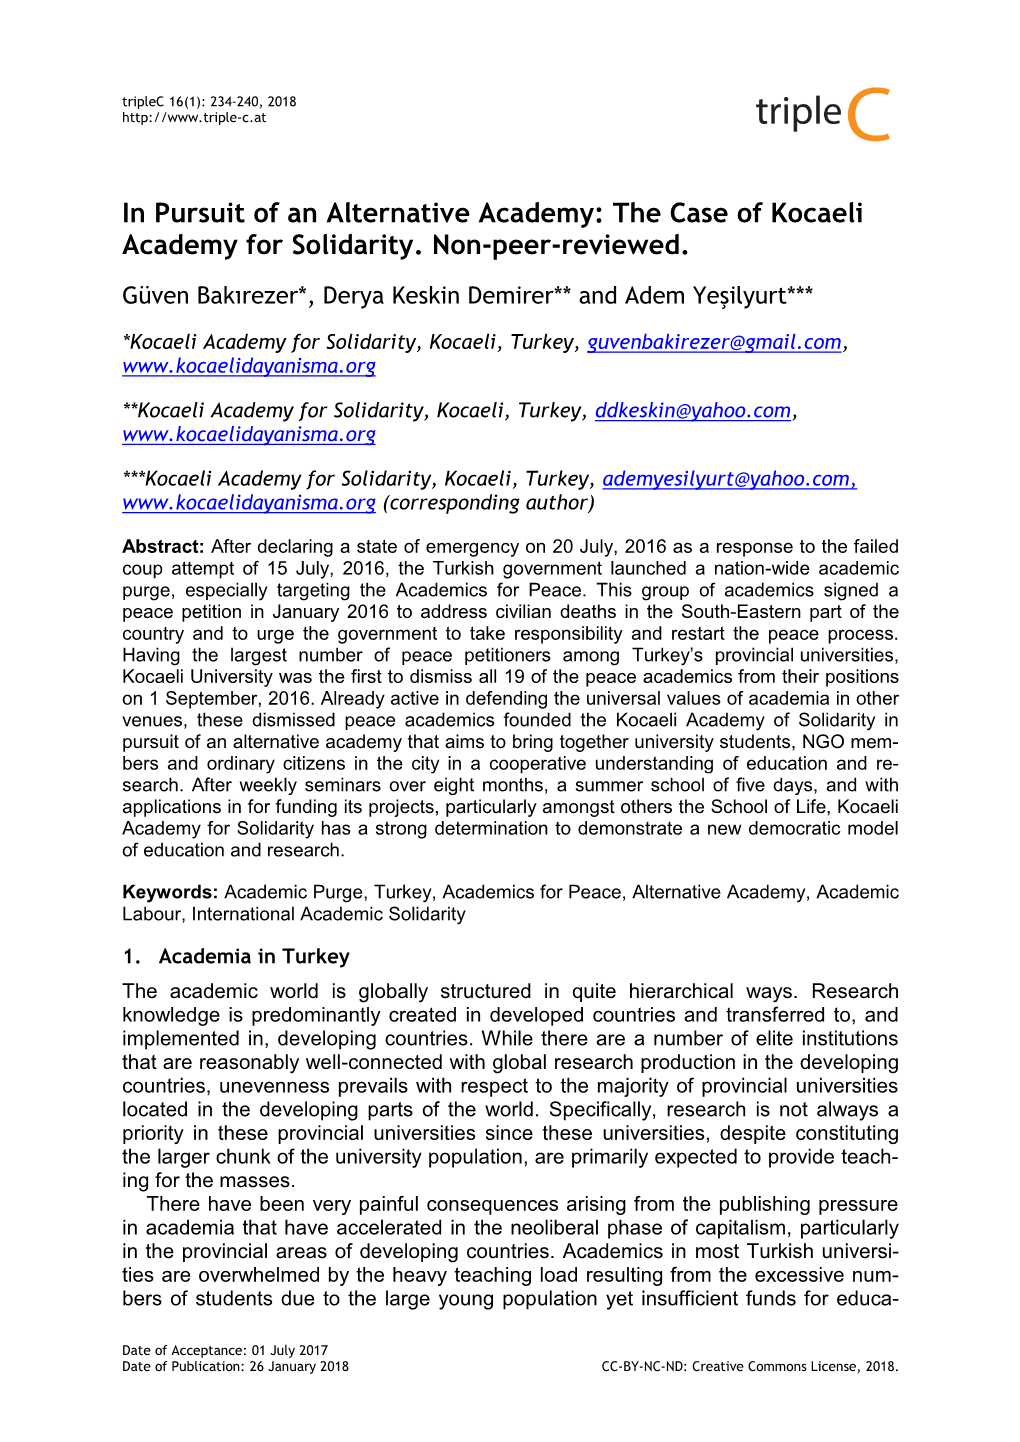 The Case of Kocaeli Academy for Solidarity. Non-Peer-Reviewed